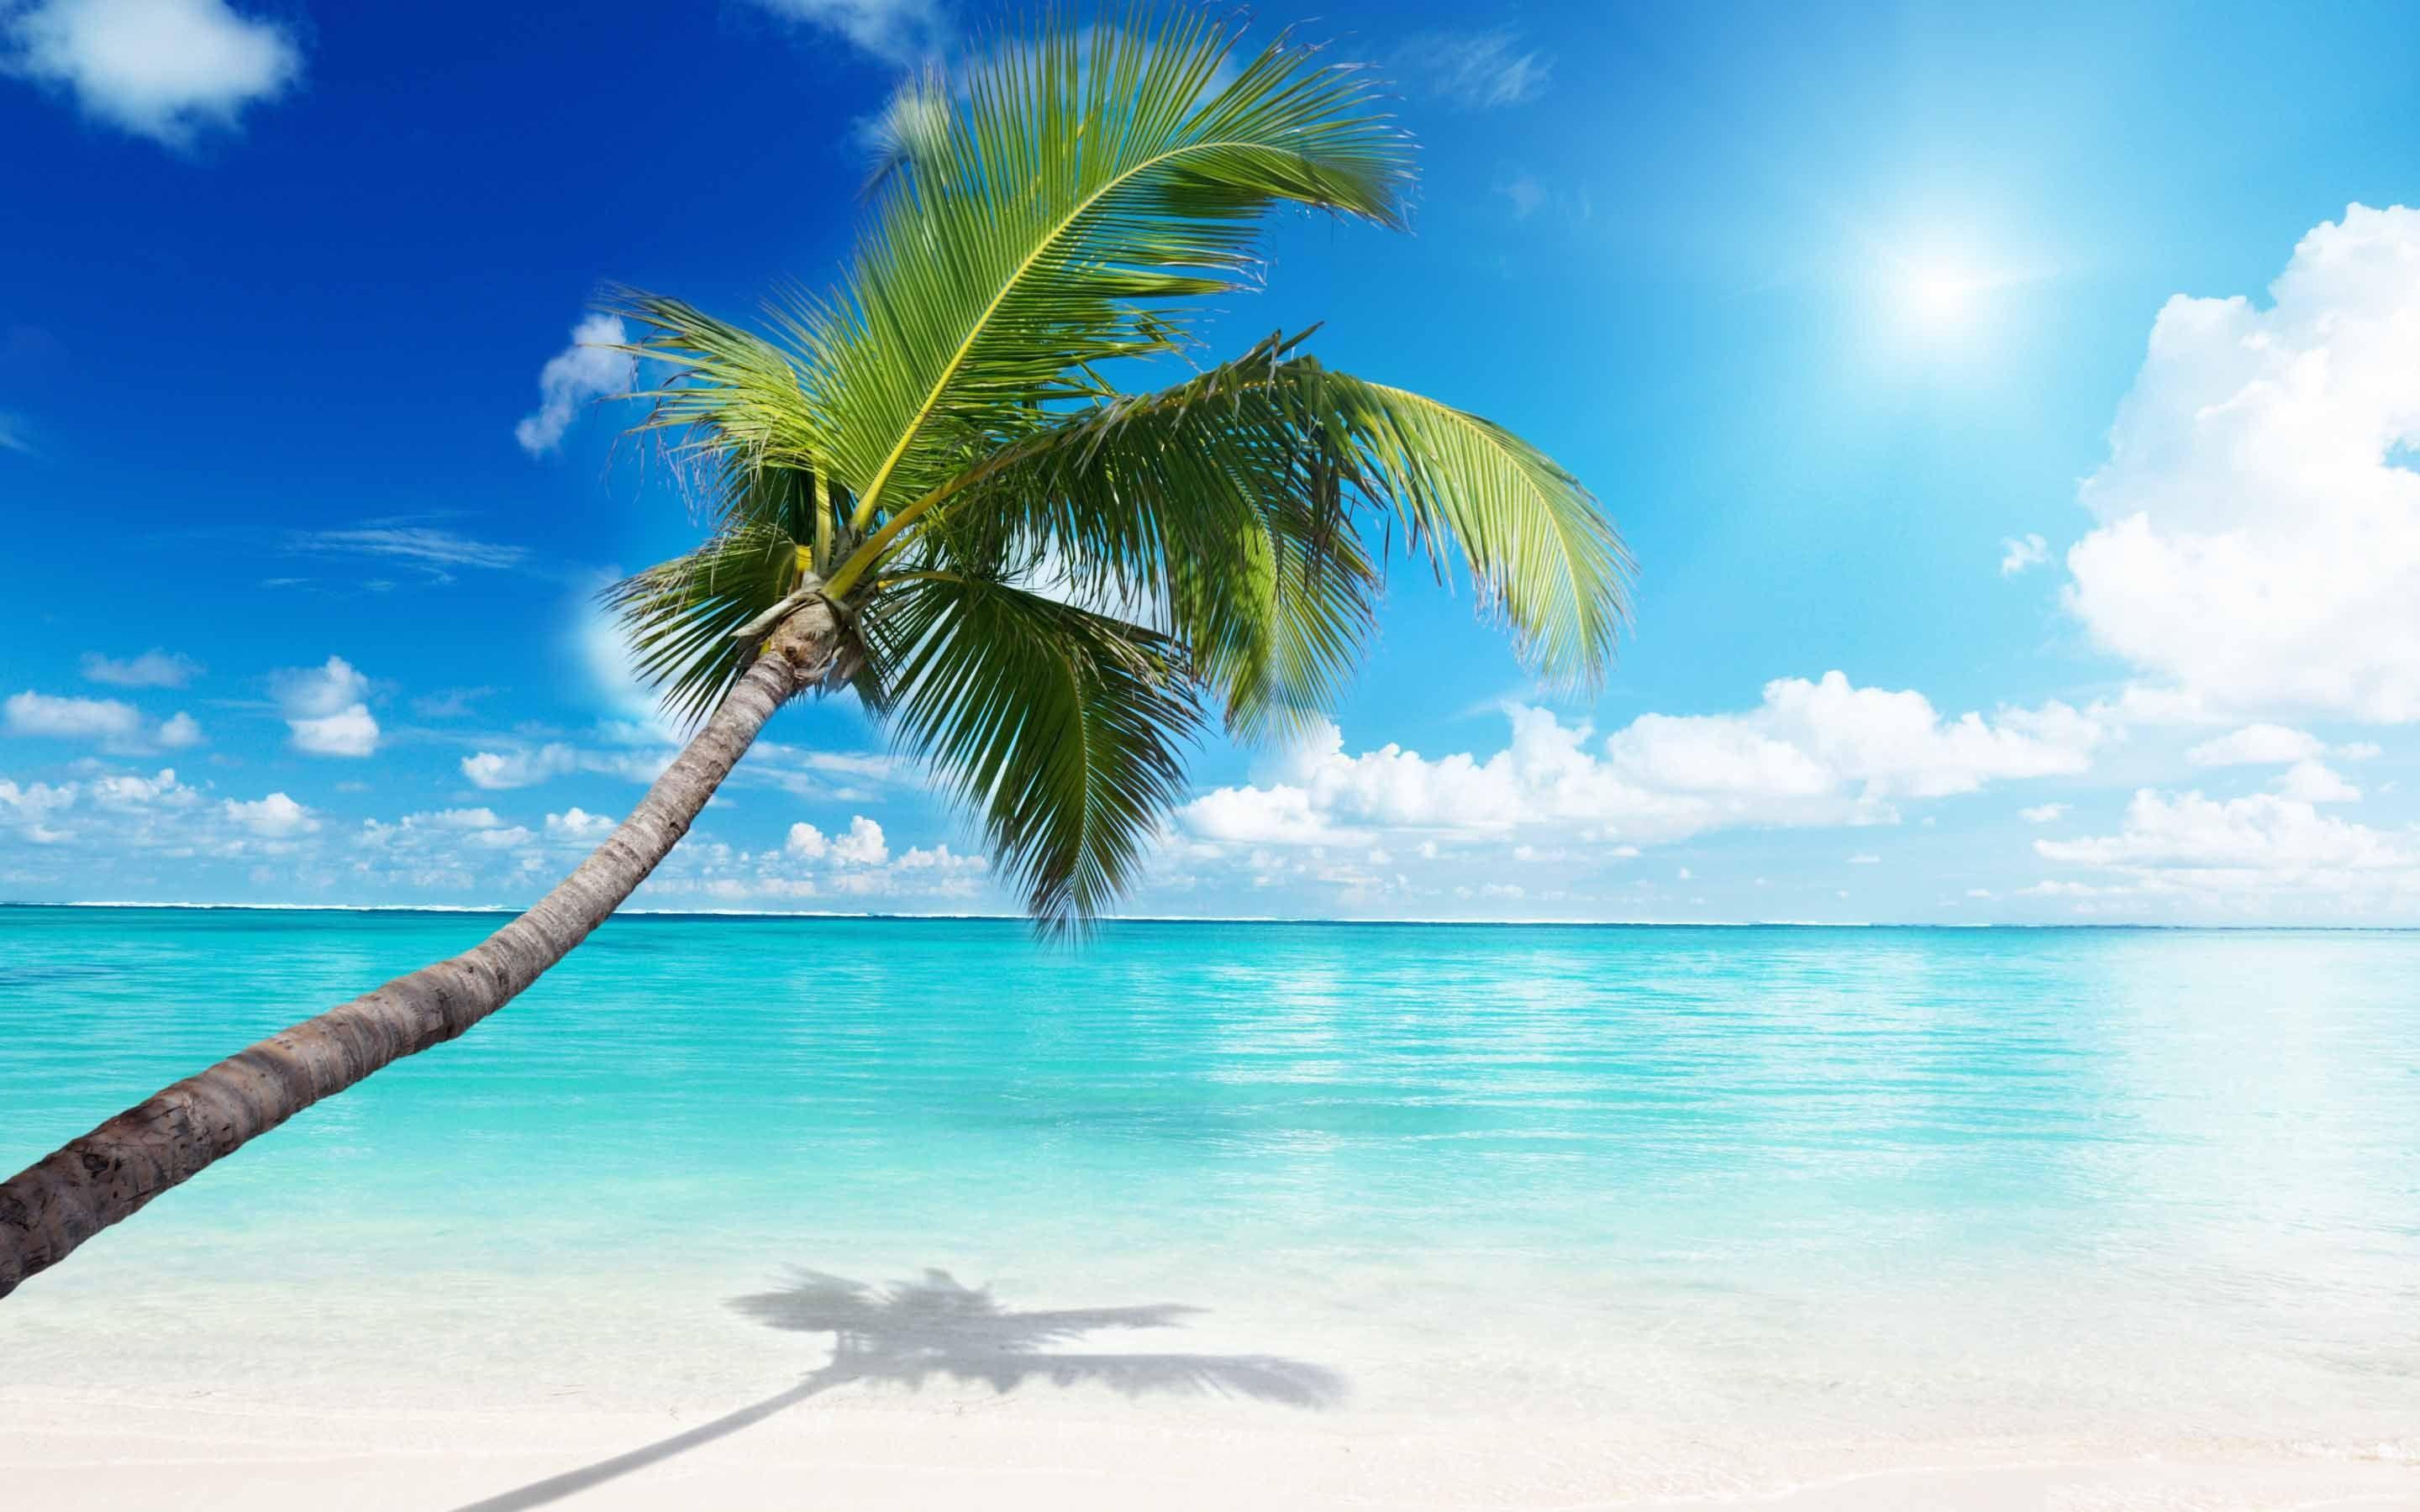 1920x1080  1920x1080 beach wallpapers for mac free JPG 608 kB   Coolwallpapersme